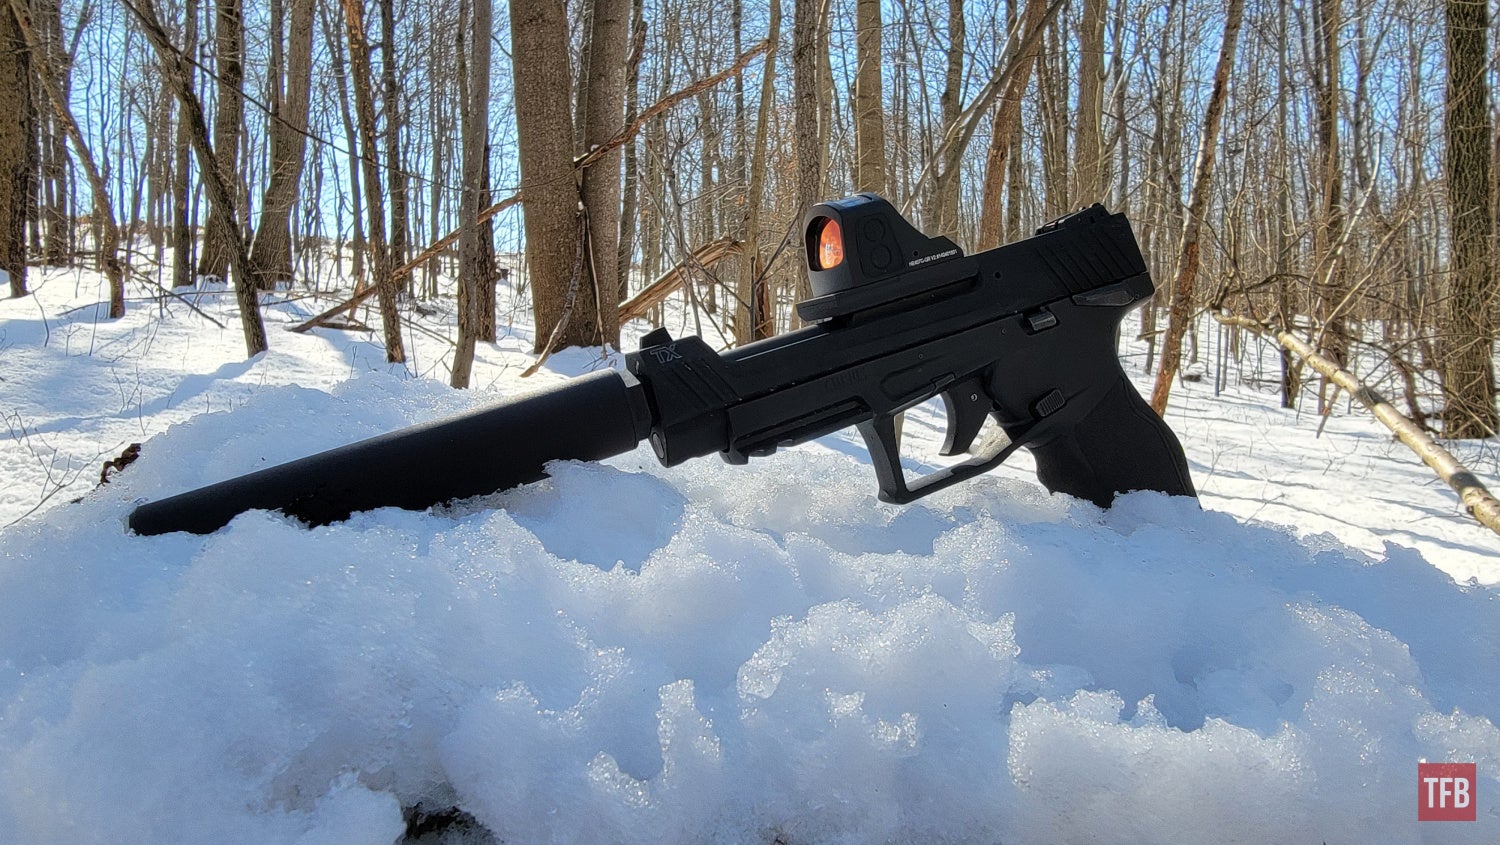 The Rimfire Report: The Taurus TX 22 Competition - Review